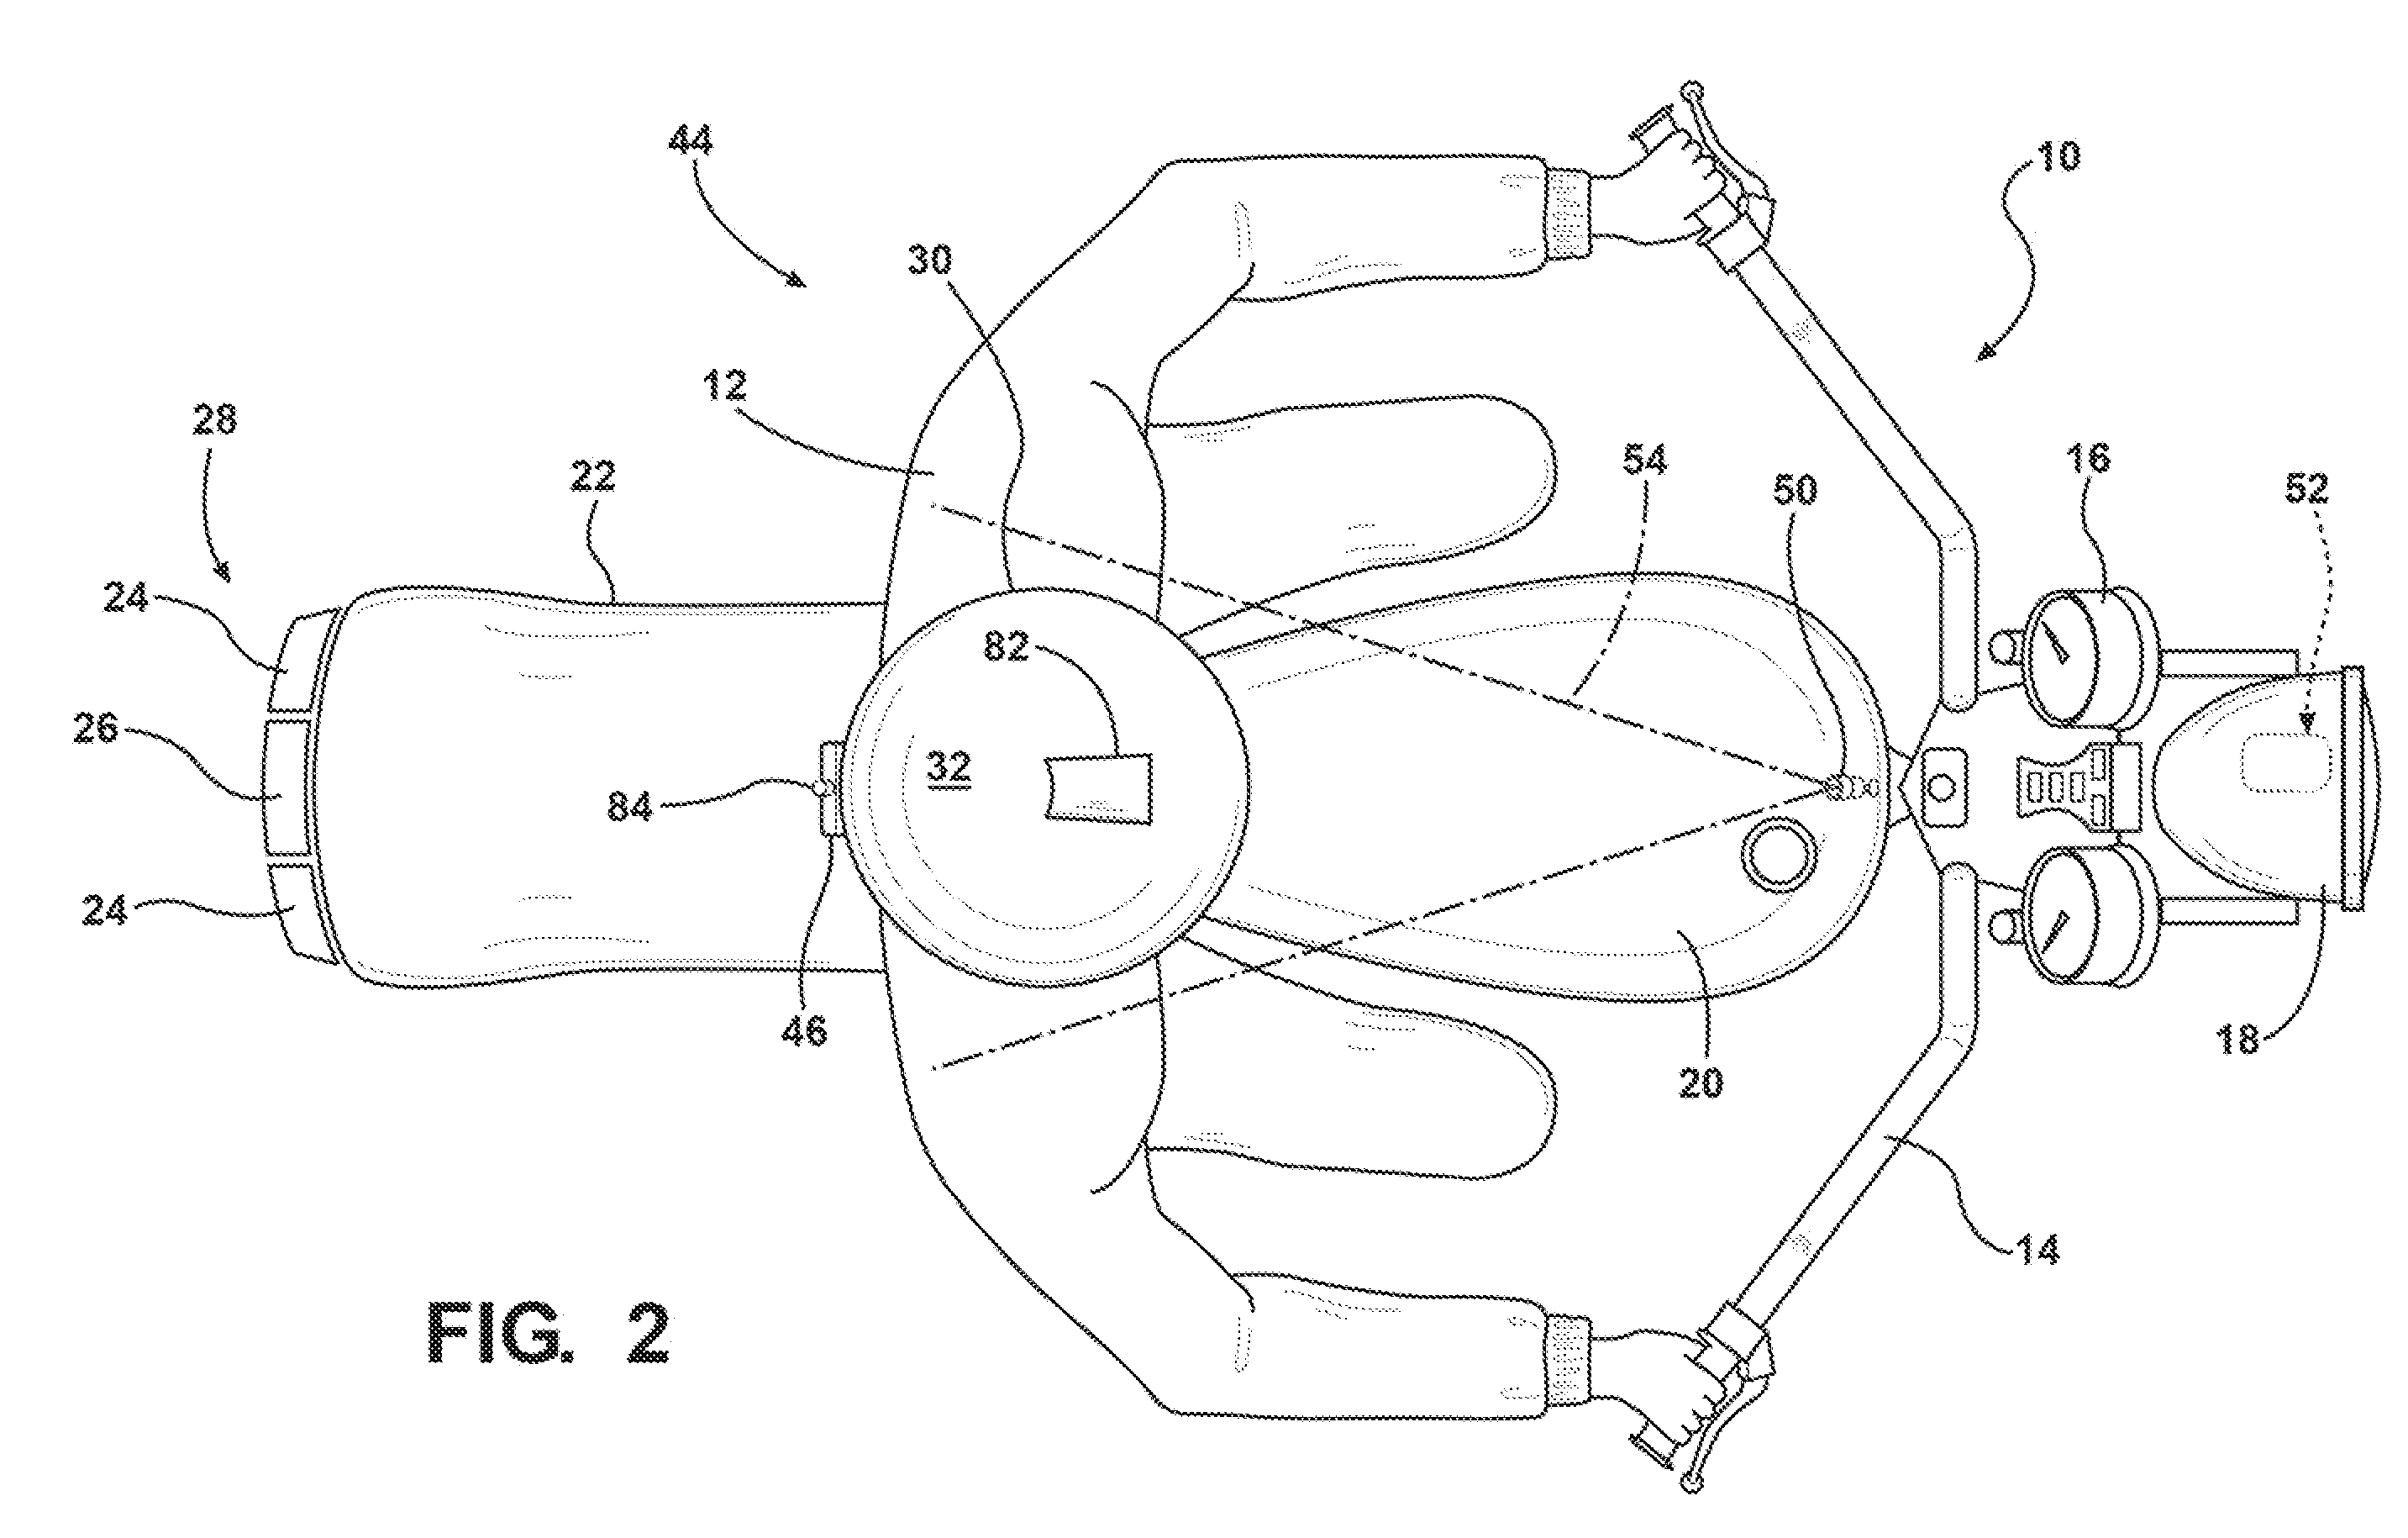 Communications assembly adapted for use with a helmet